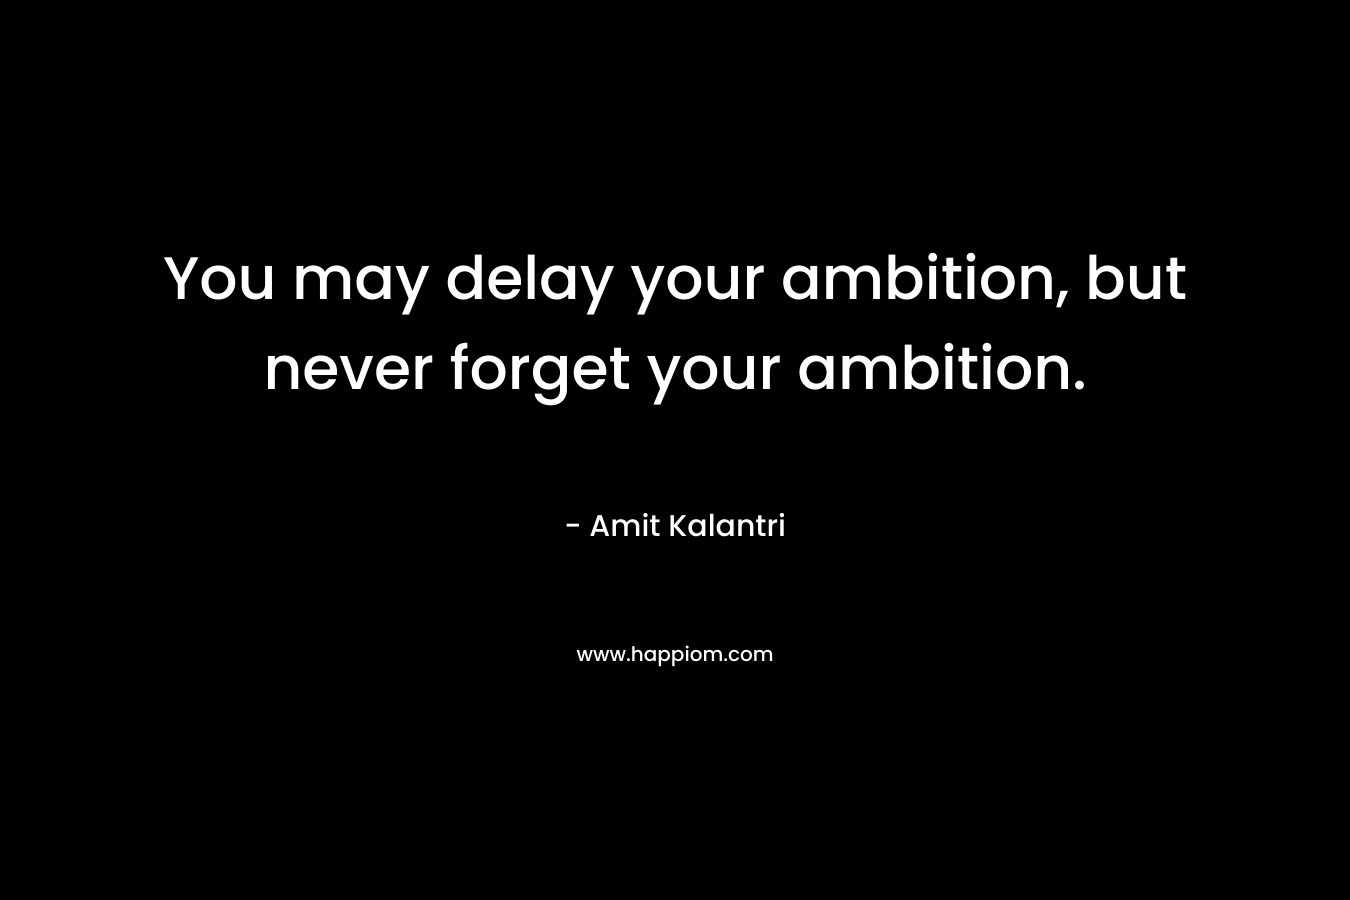 You may delay your ambition, but never forget your ambition. – Amit Kalantri